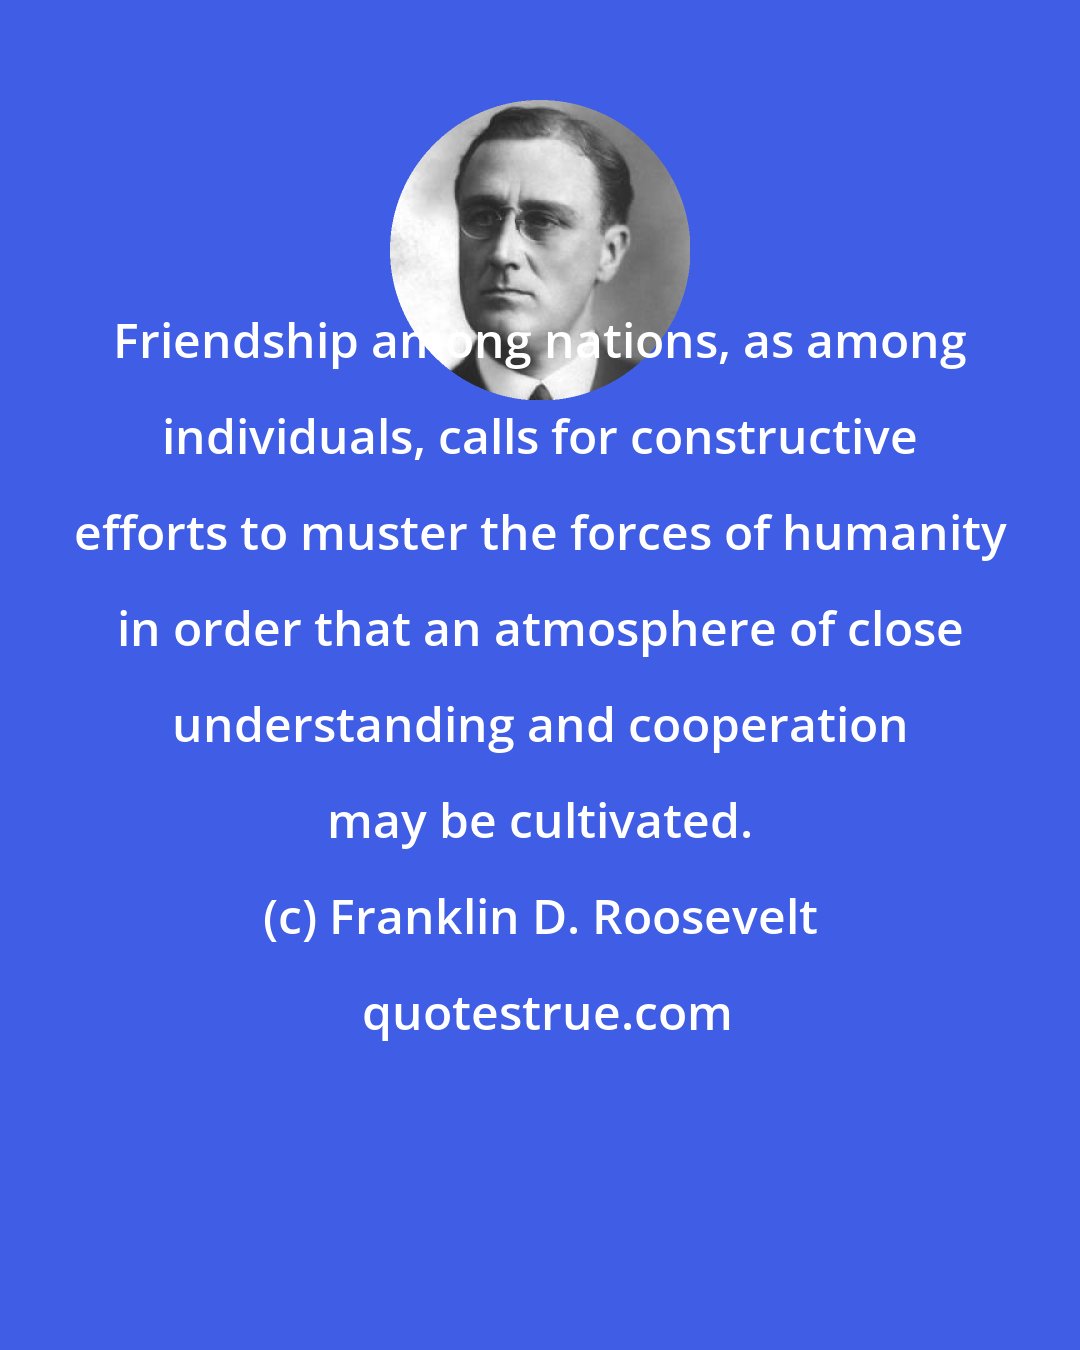 Franklin D. Roosevelt: Friendship among nations, as among individuals, calls for constructive efforts to muster the forces of humanity in order that an atmosphere of close understanding and cooperation may be cultivated.